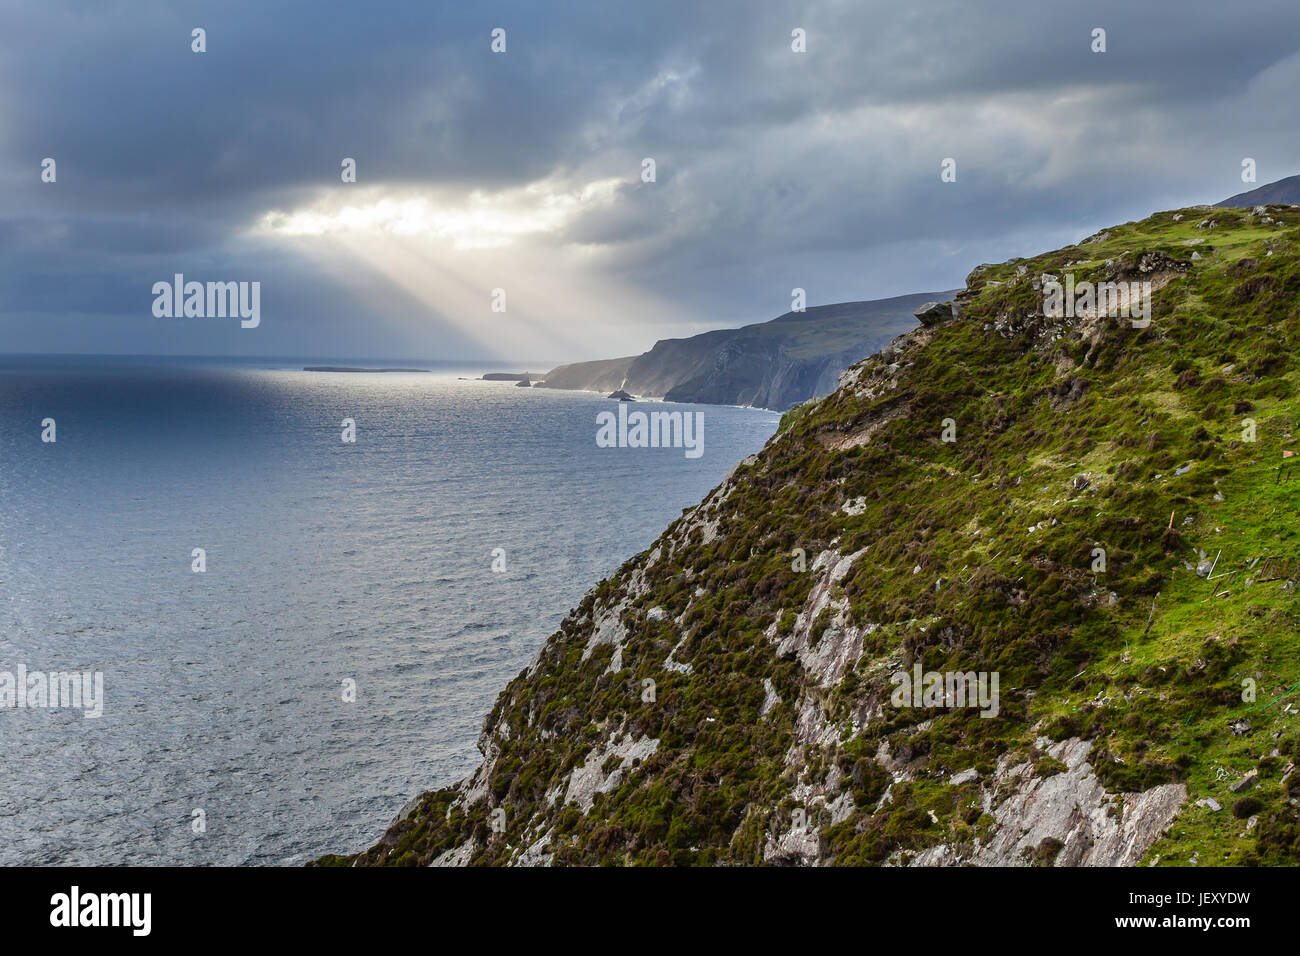 Slieve League, sometimes Slieve Leag or Slieve Liag (Irish: Sliabh Liag) is a mountain on the Atlantic coast of County Donegal, Ireland. At 601 meters Stock Photo